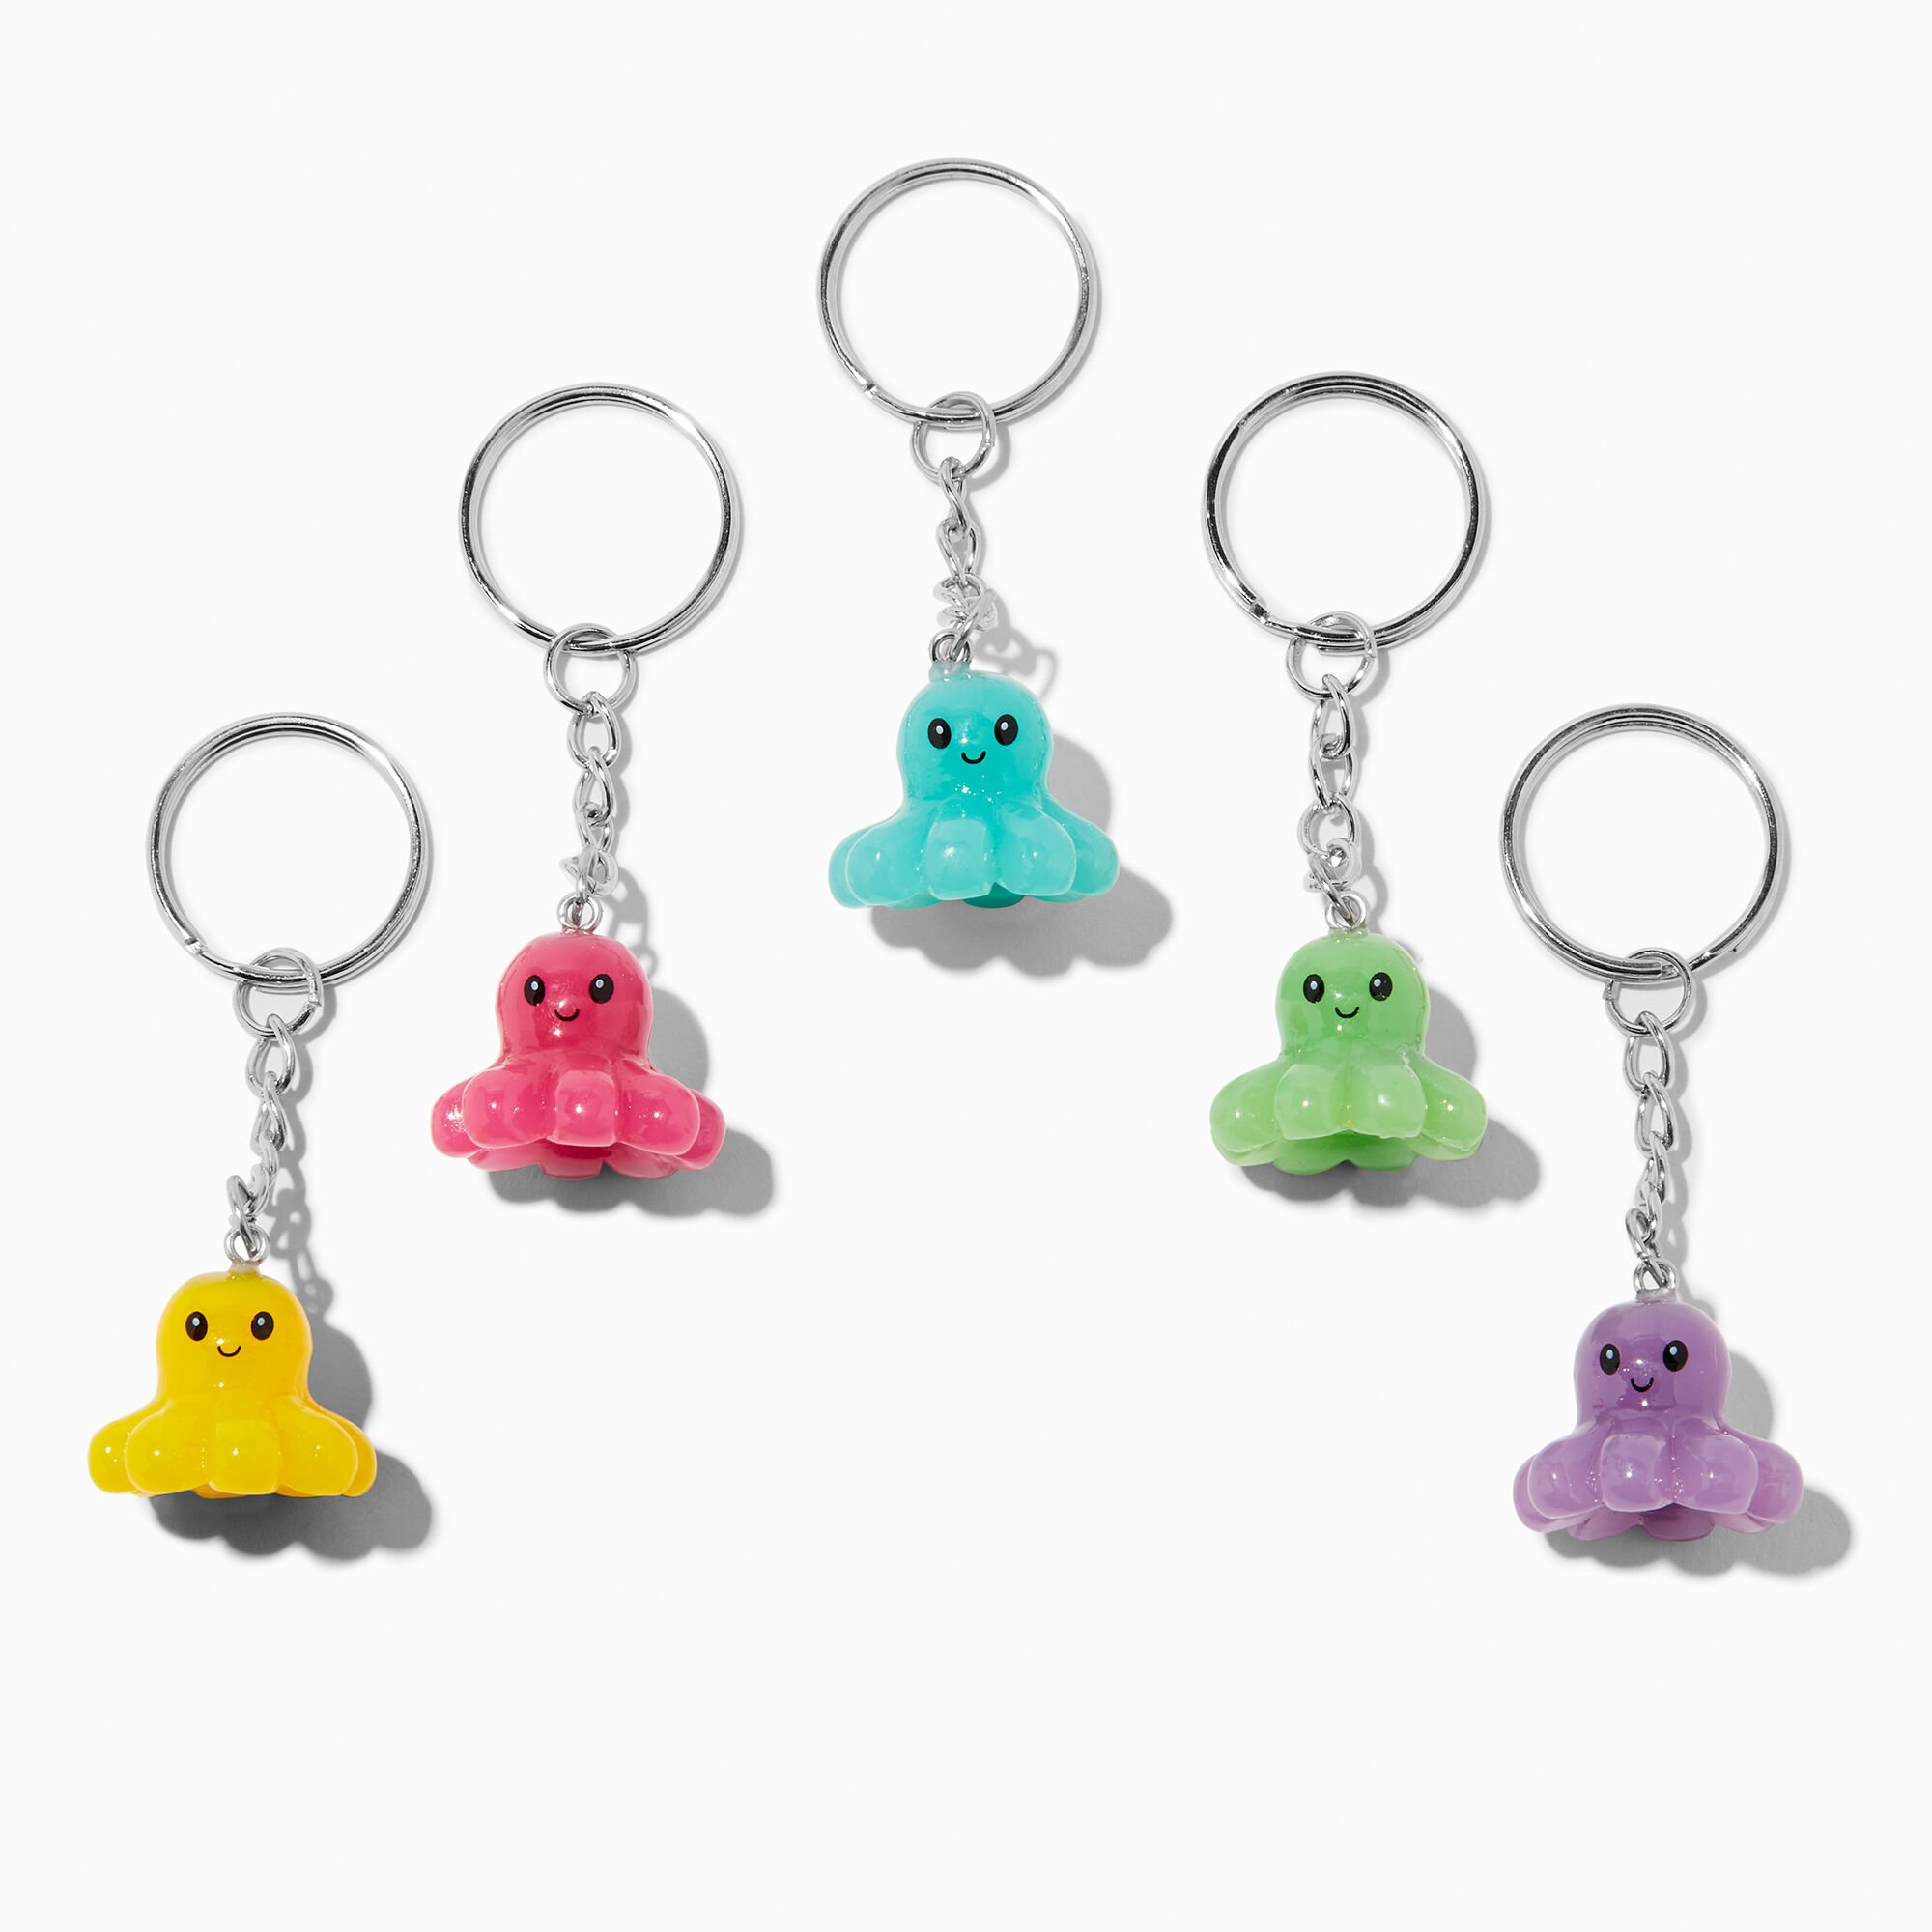 View Claires Glow In The Dark Octopus Best Friends Keyrings 5 Pack Silver information